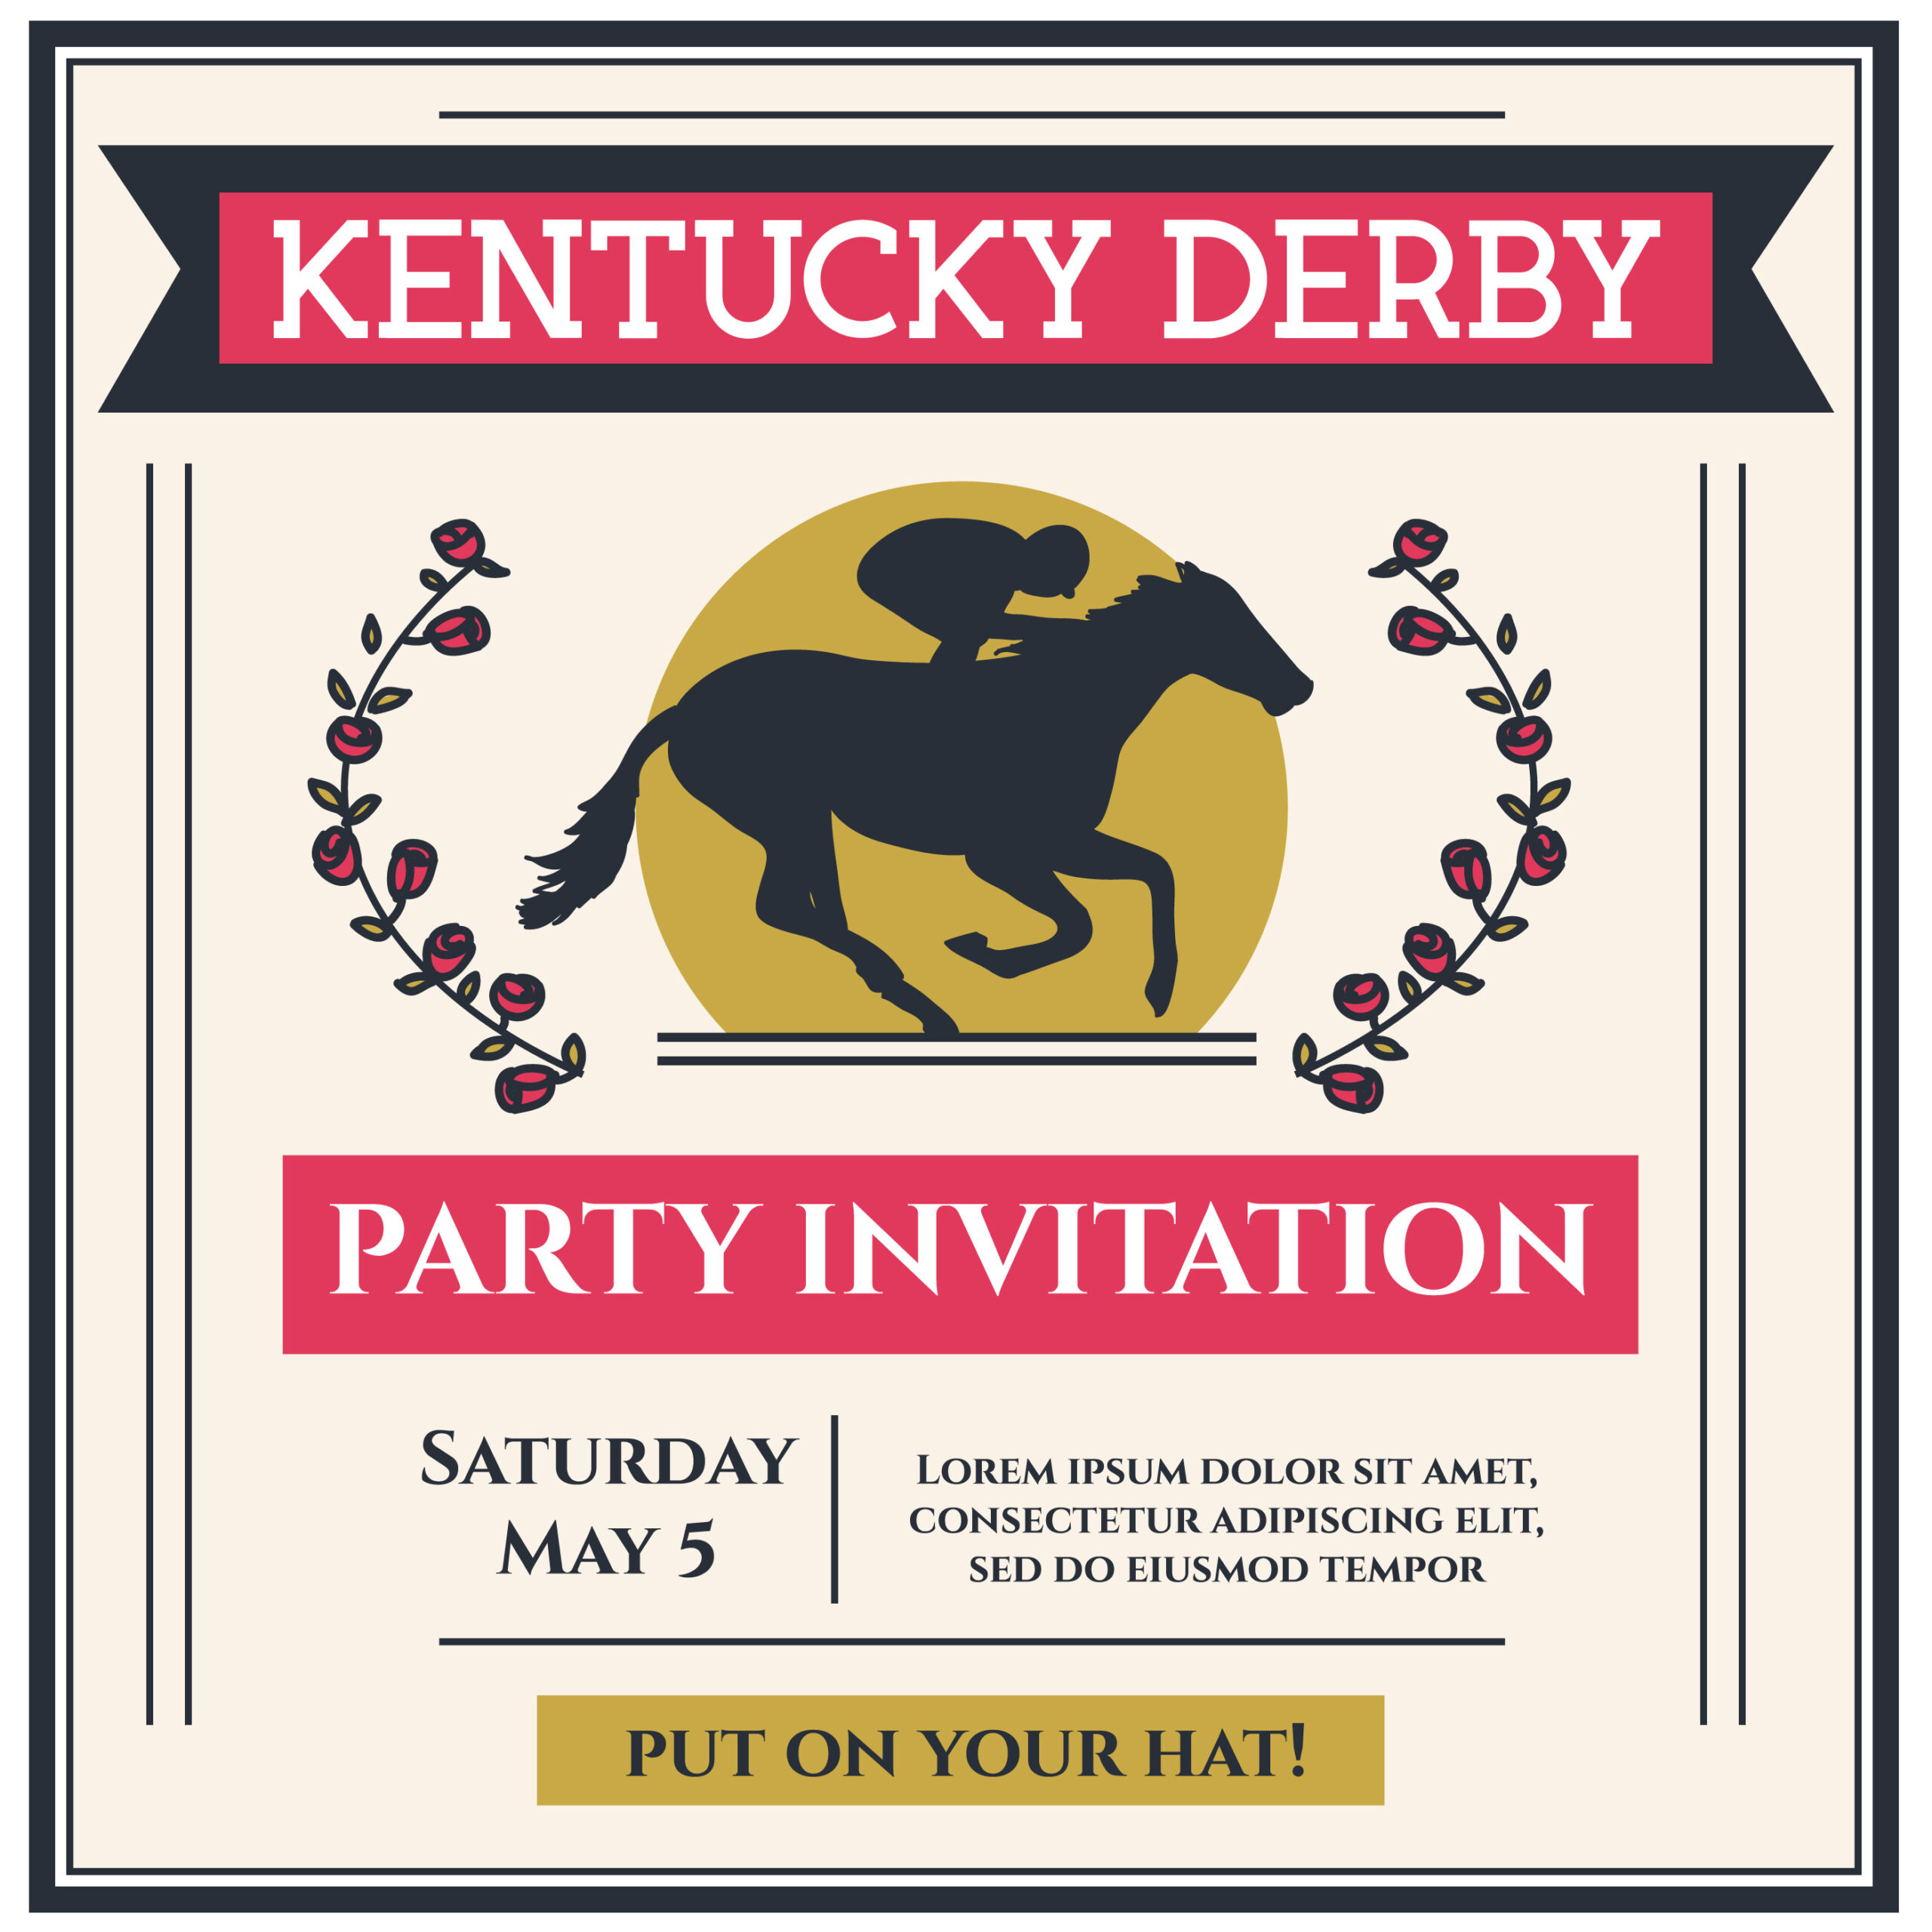 5 Kentucky Derby Frequency Demystified: A Comprehensive Guide To The Beloved Event